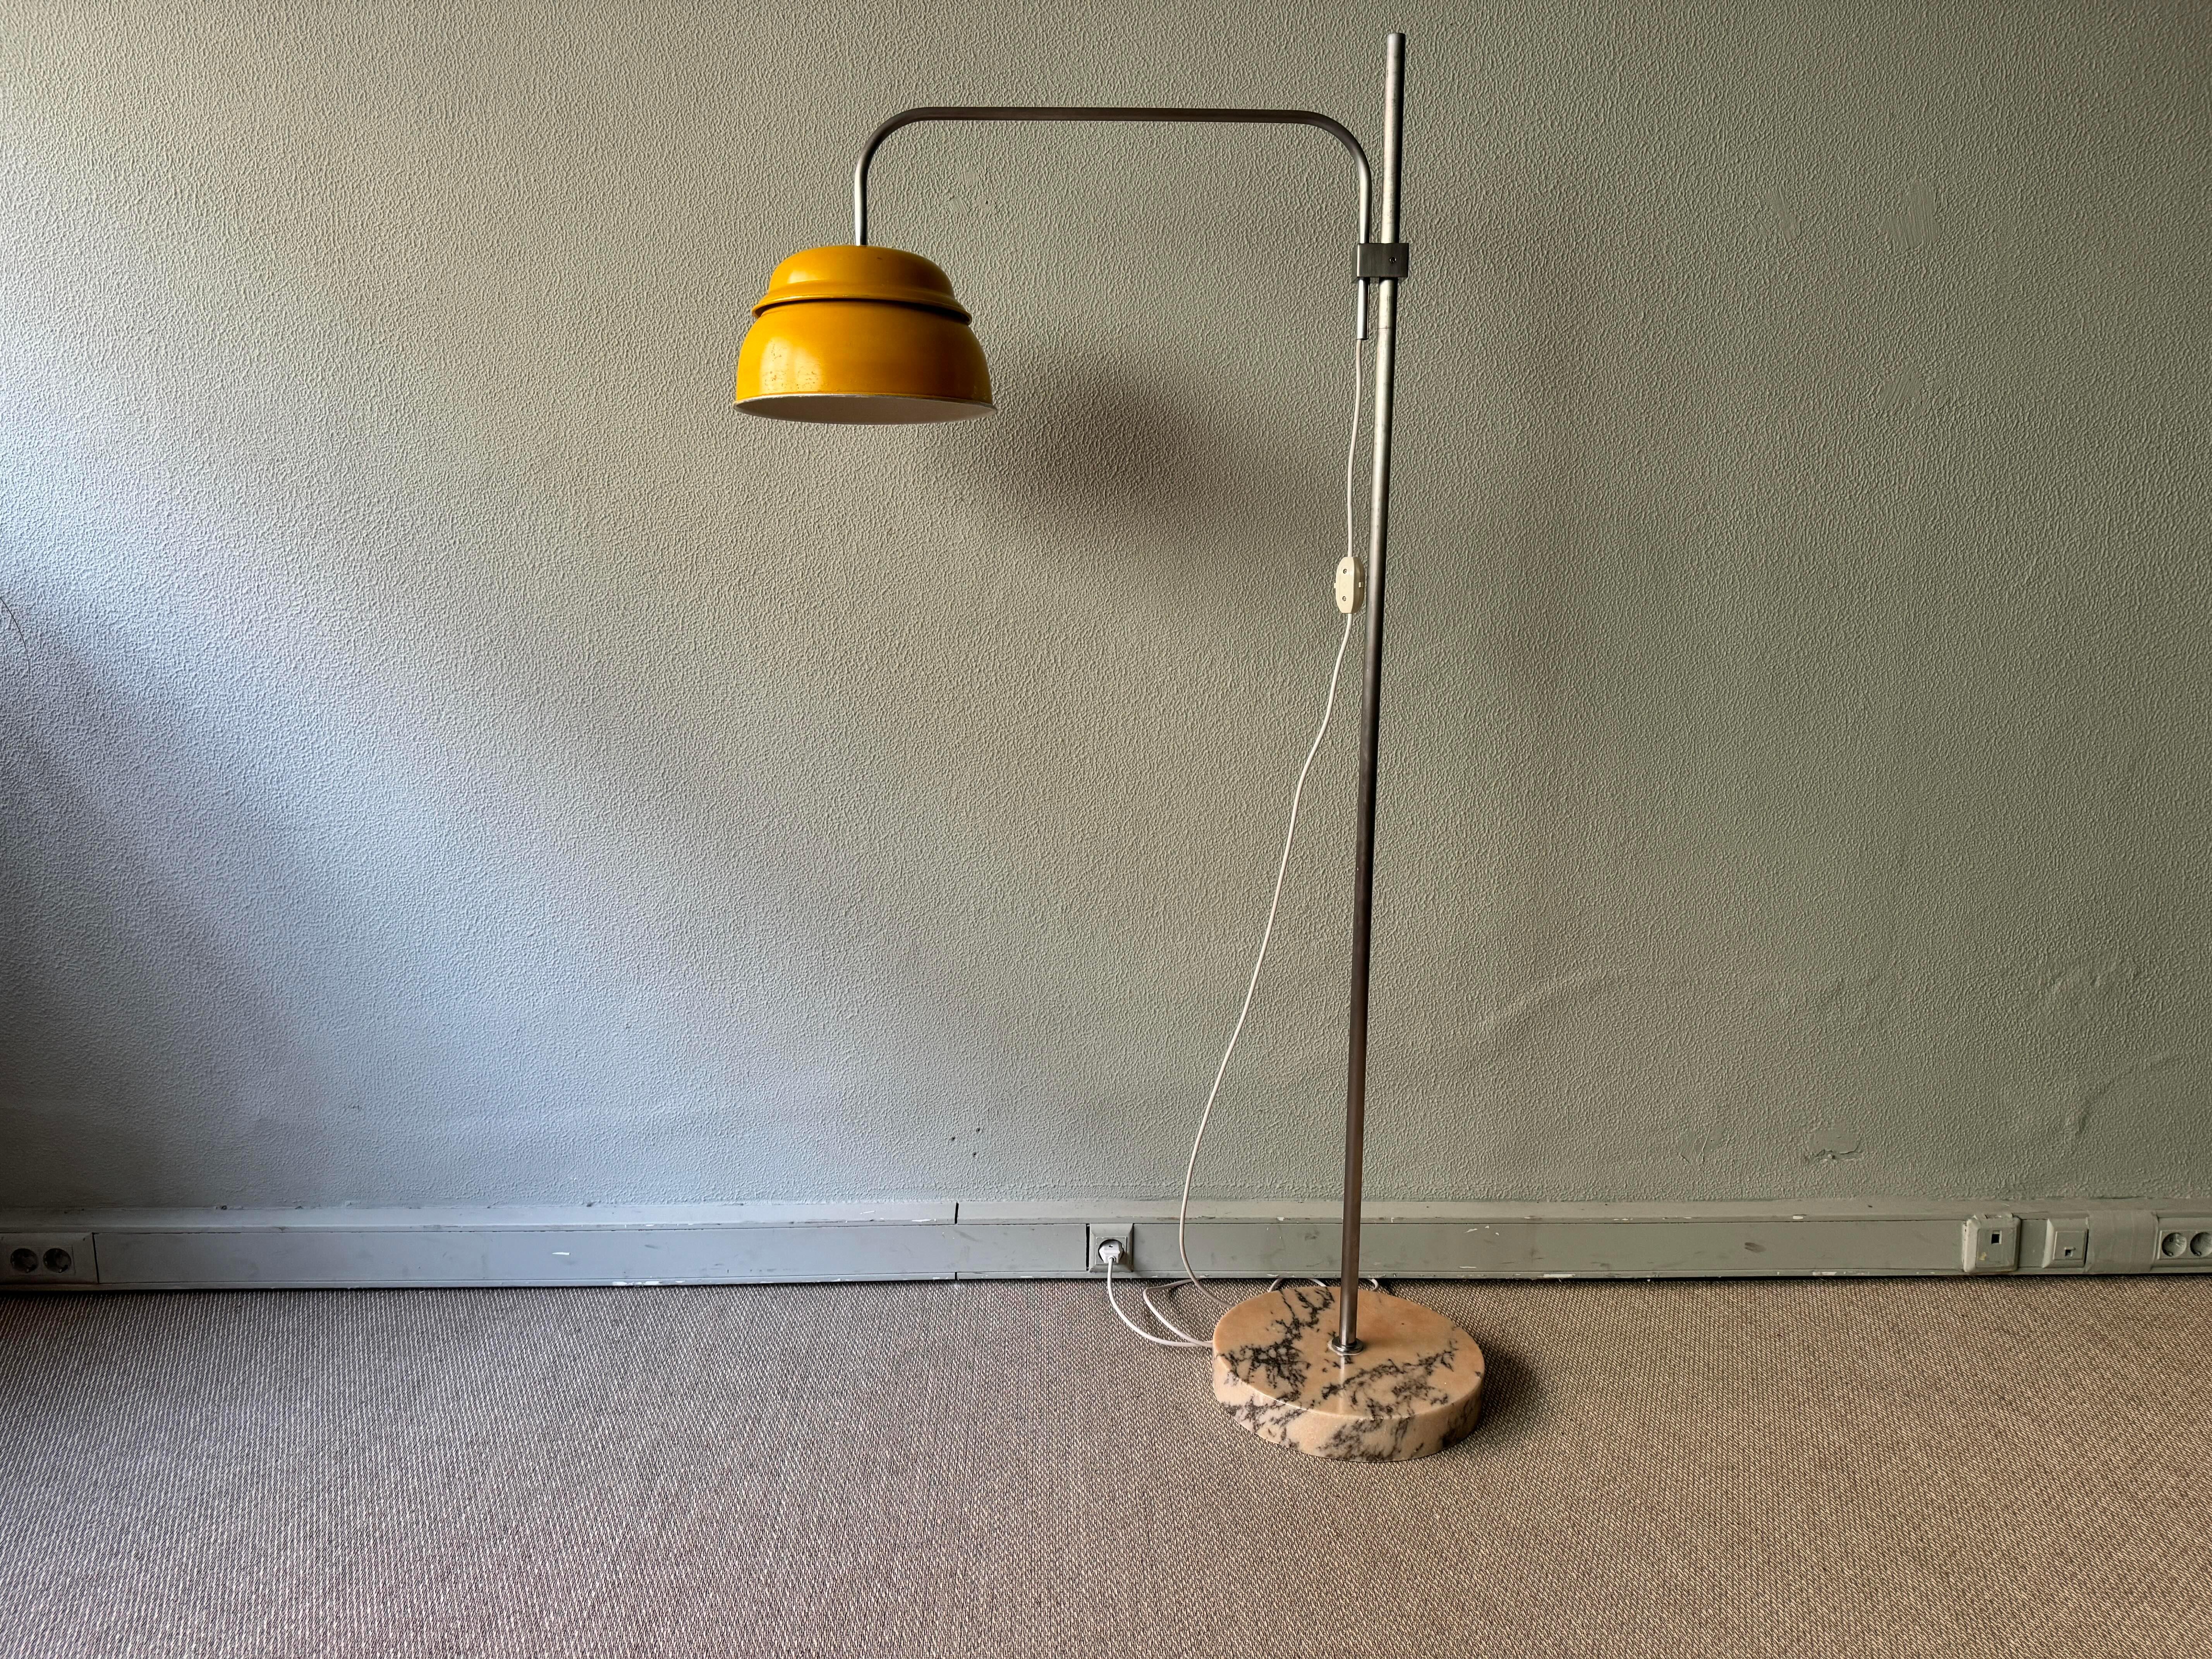 Add a touch of vintage elegance to your living space with this stunning floor lamp by Francisco Conceição Silva, a renowned designer from Portugal in the 1970's. The brushed steel stem and yellow painted metal diffuser create a sleek and modern